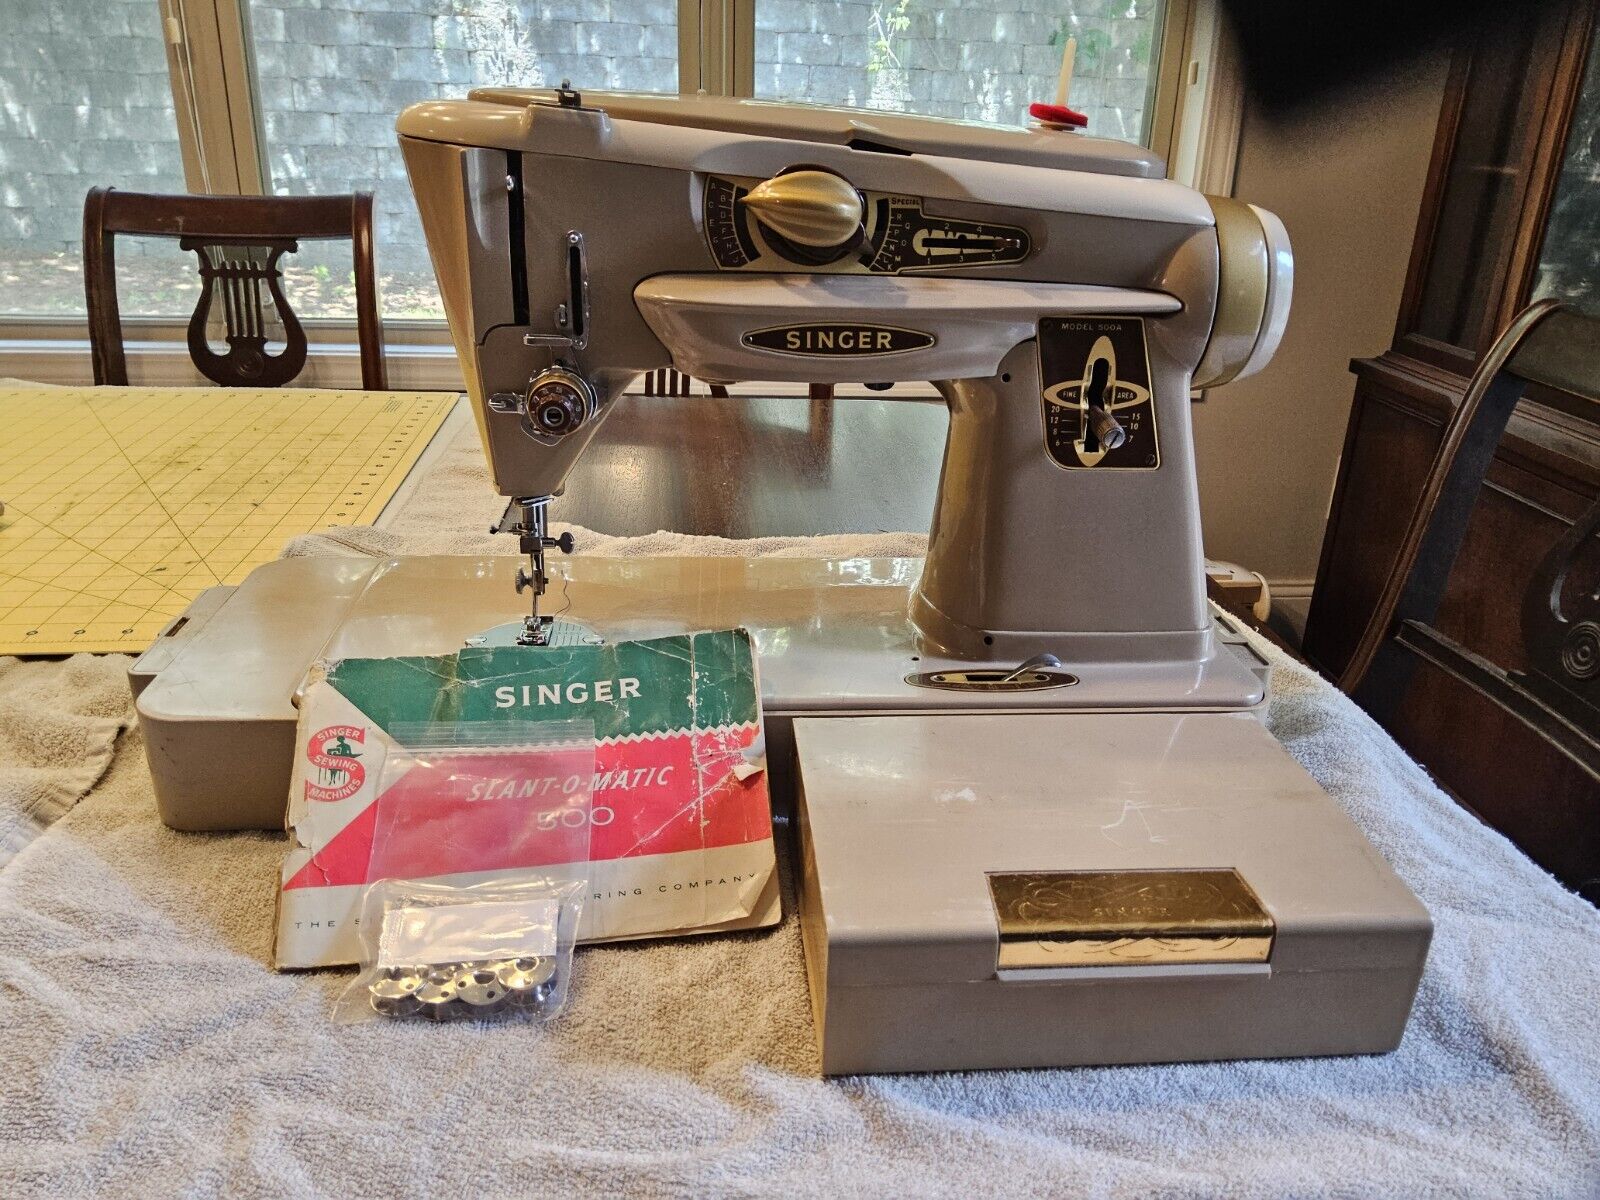 Singer 500a sewing machine cleaned and serviced V/g cond SN NC337905 w Access